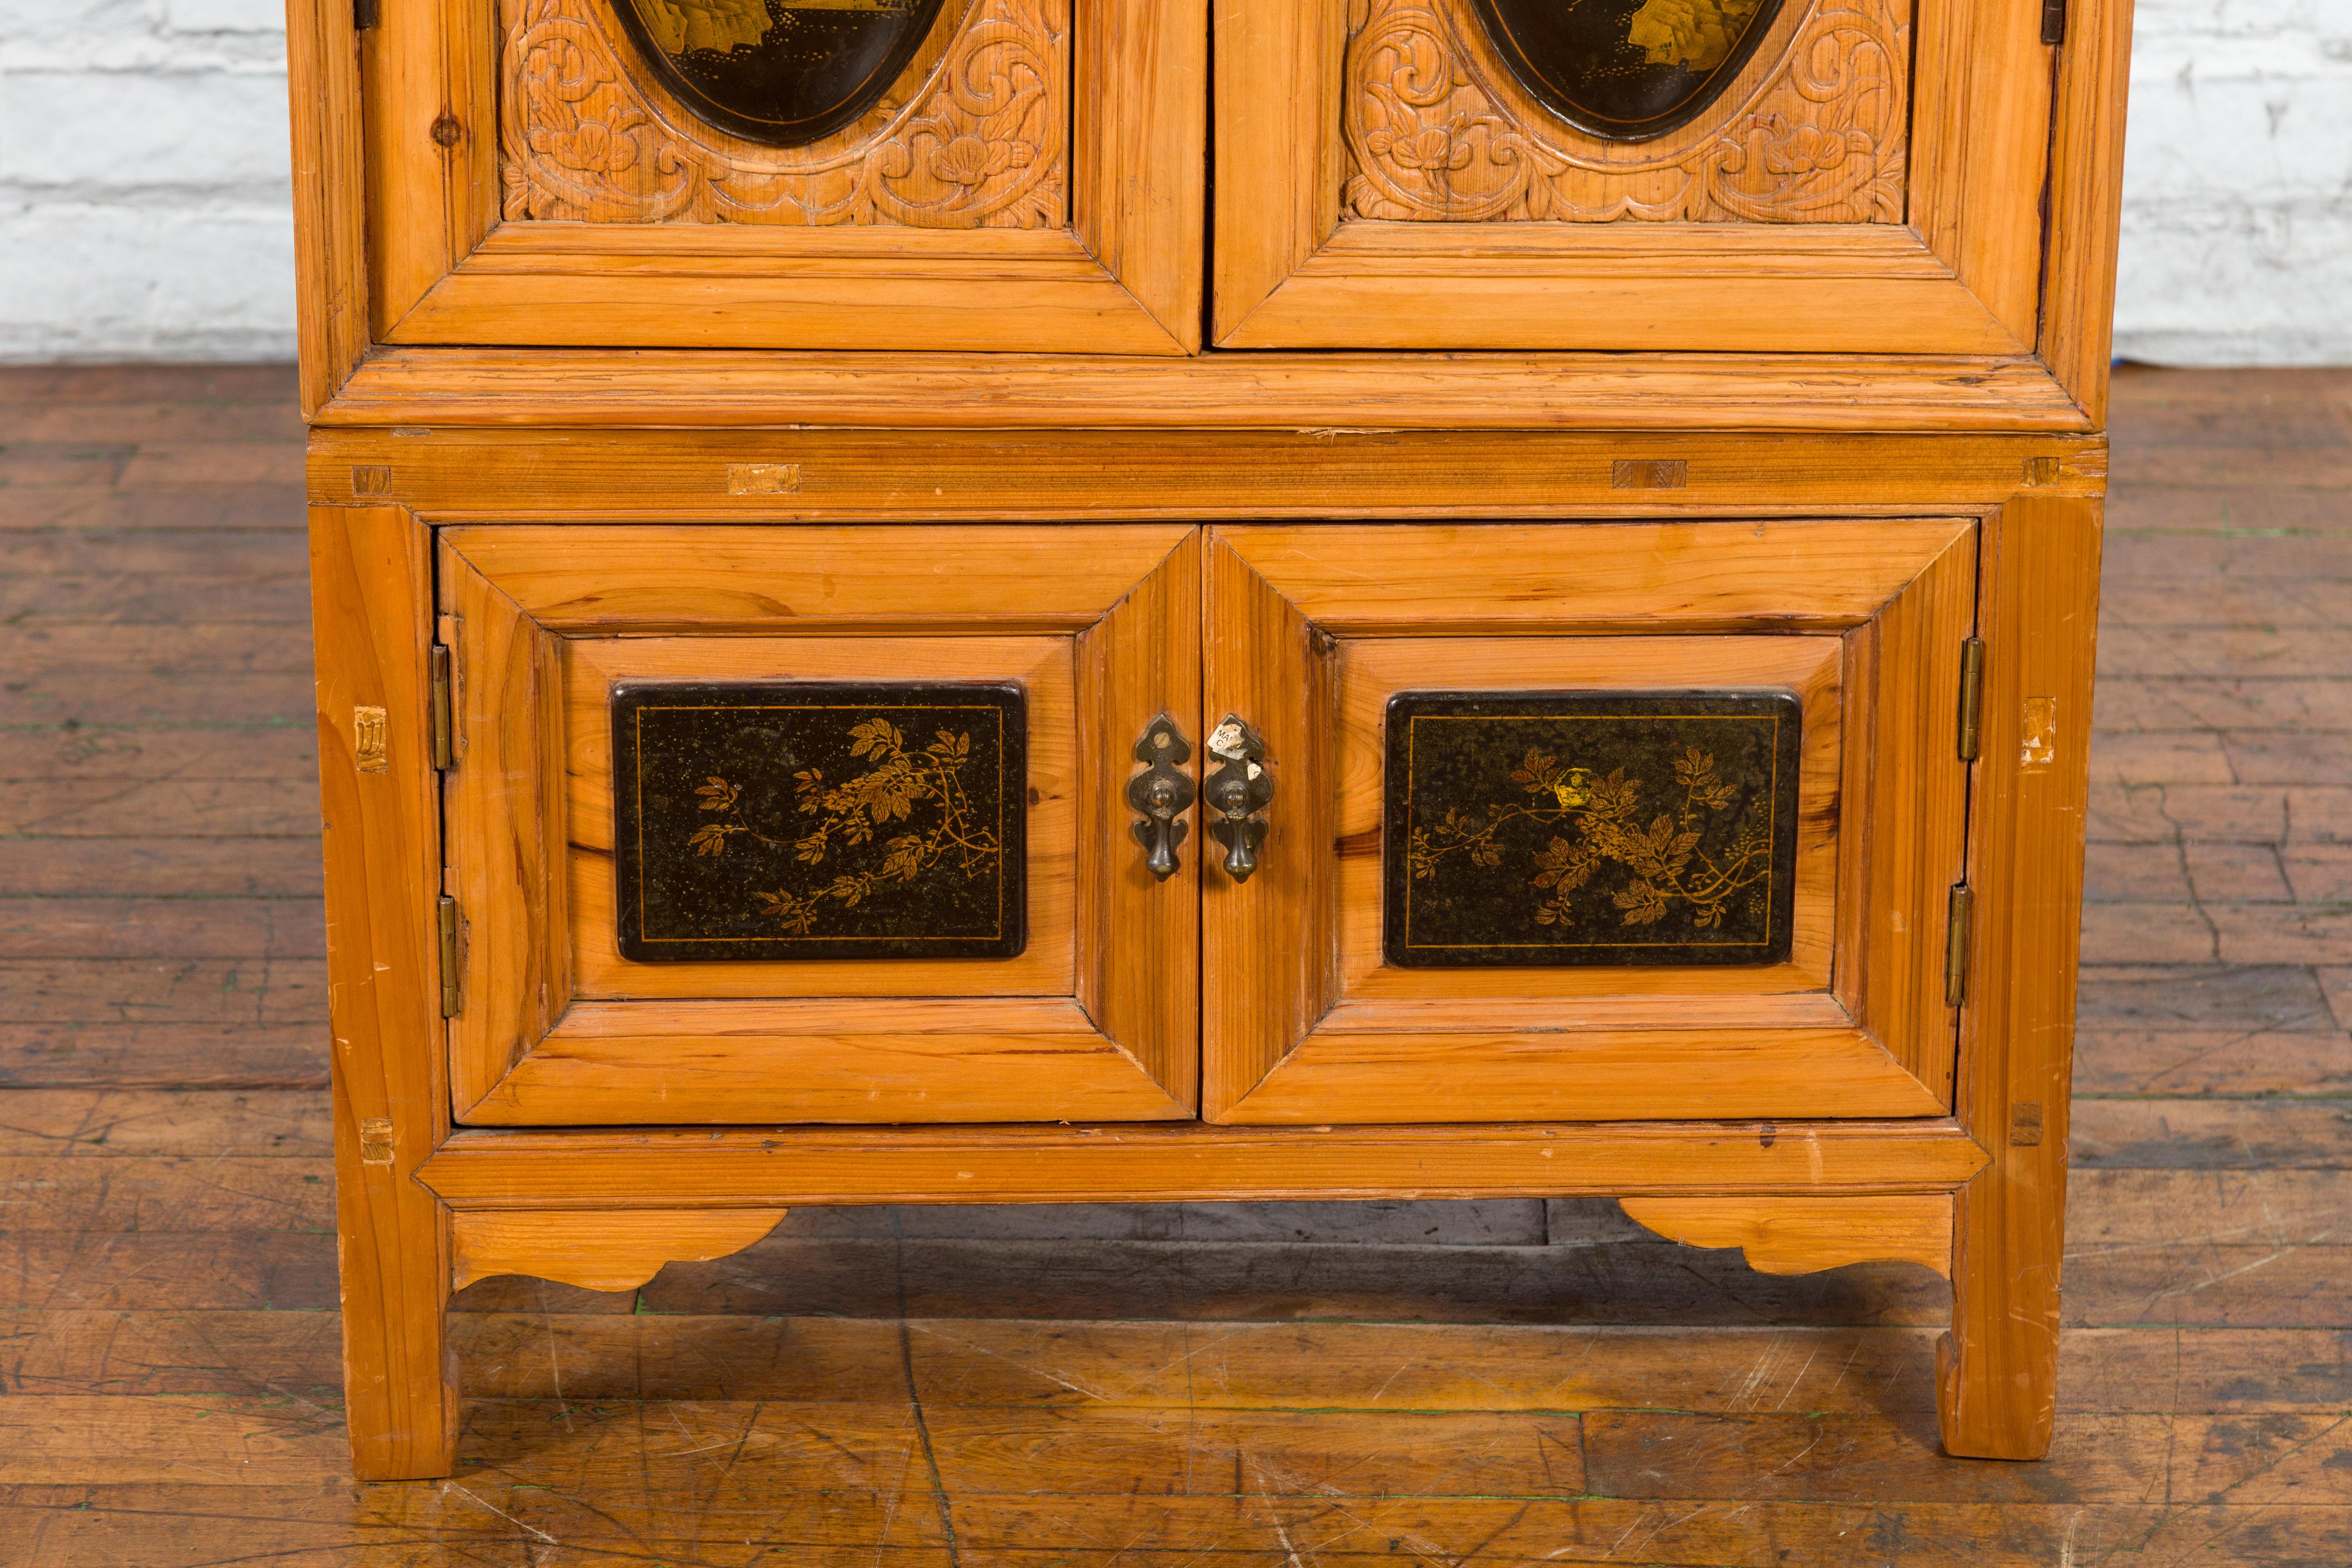 20th Century Tall Chinese Qing Dynasty Style Wooden Cabinet with Chinoiserie Panels For Sale